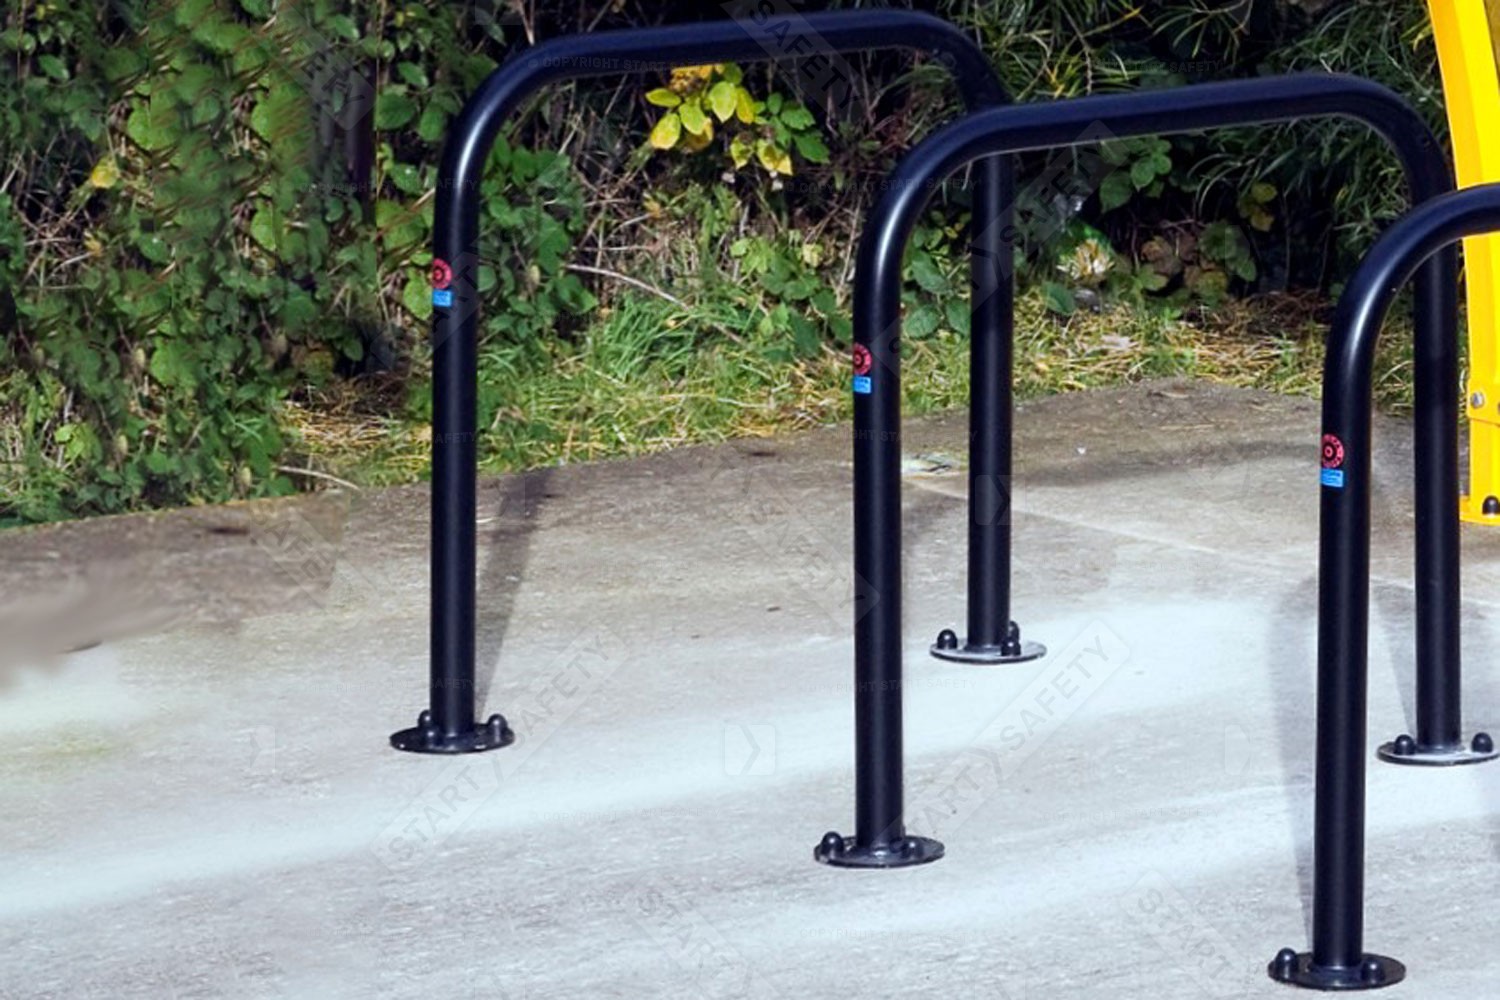 Black Autopa Sheffield Cycle Stands Installed